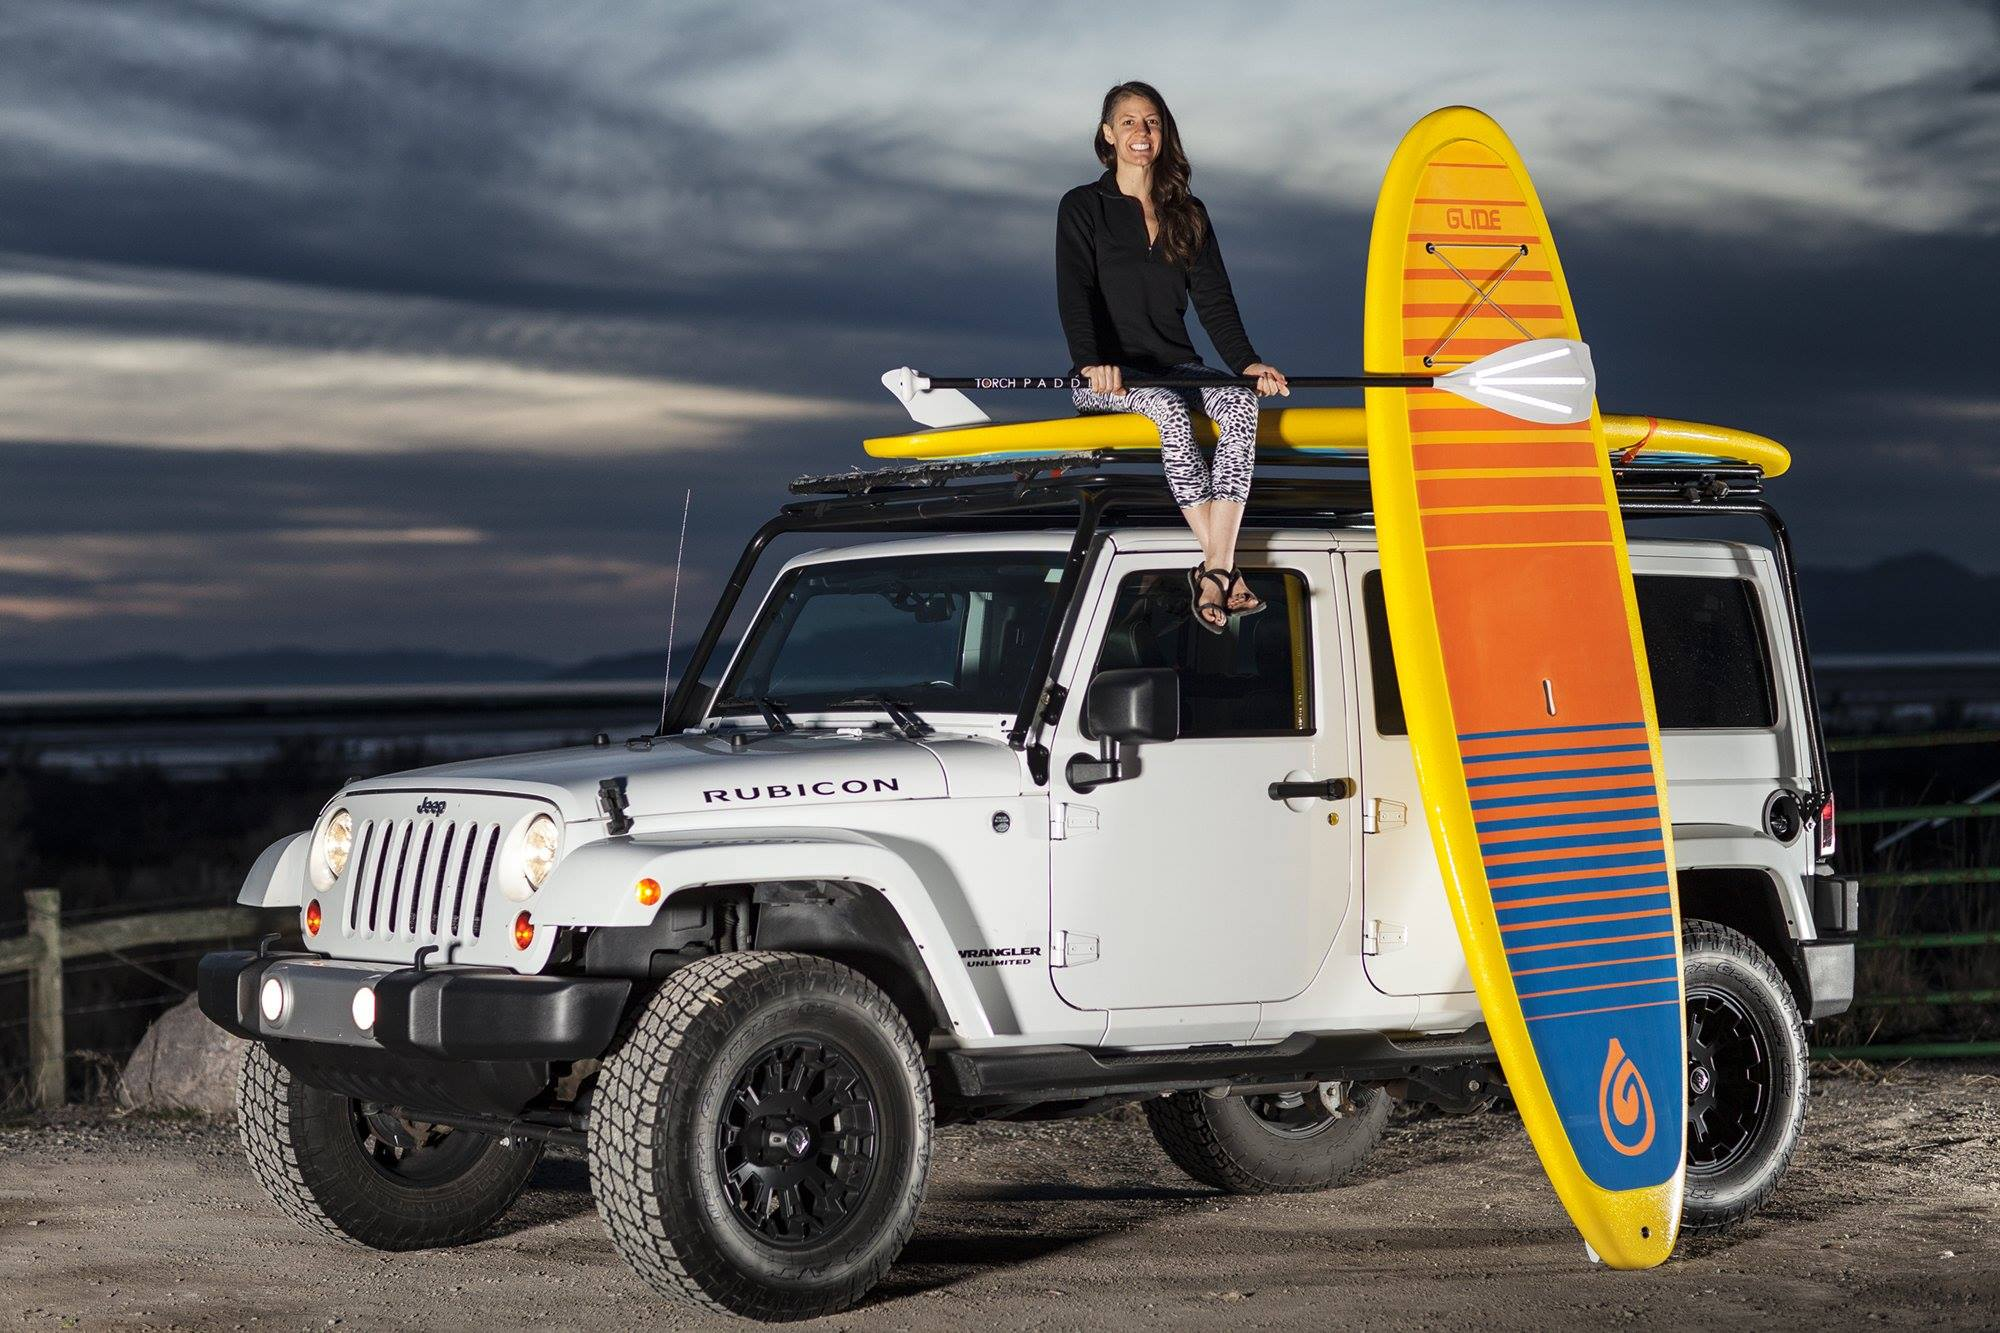 inflatable recreational paddle boards come with even a kayak seat